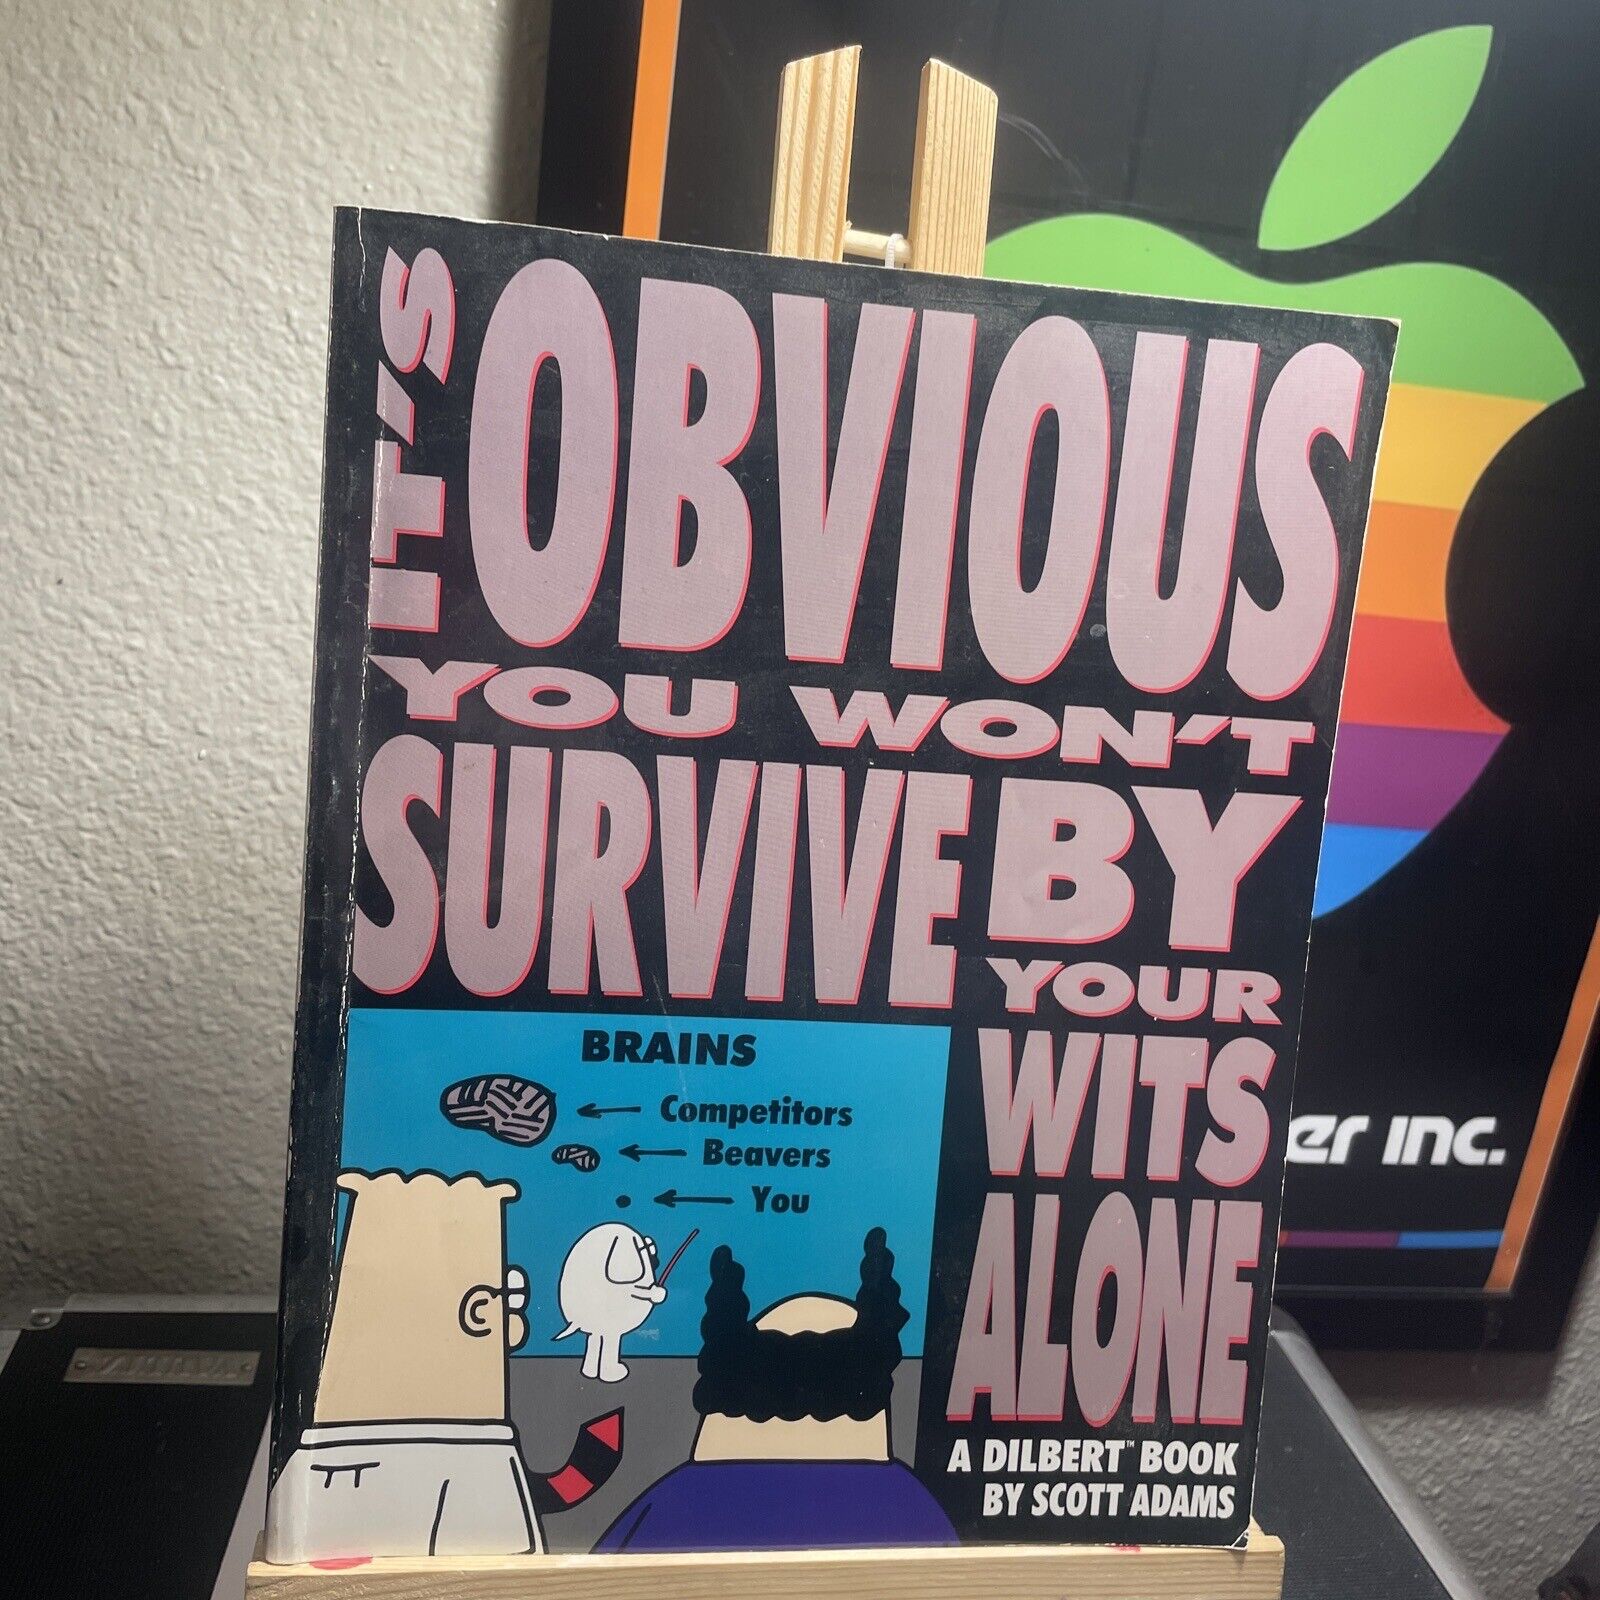 It's Obvious You Won't Survive By Your Wits Alone (Paperback, October 1995)